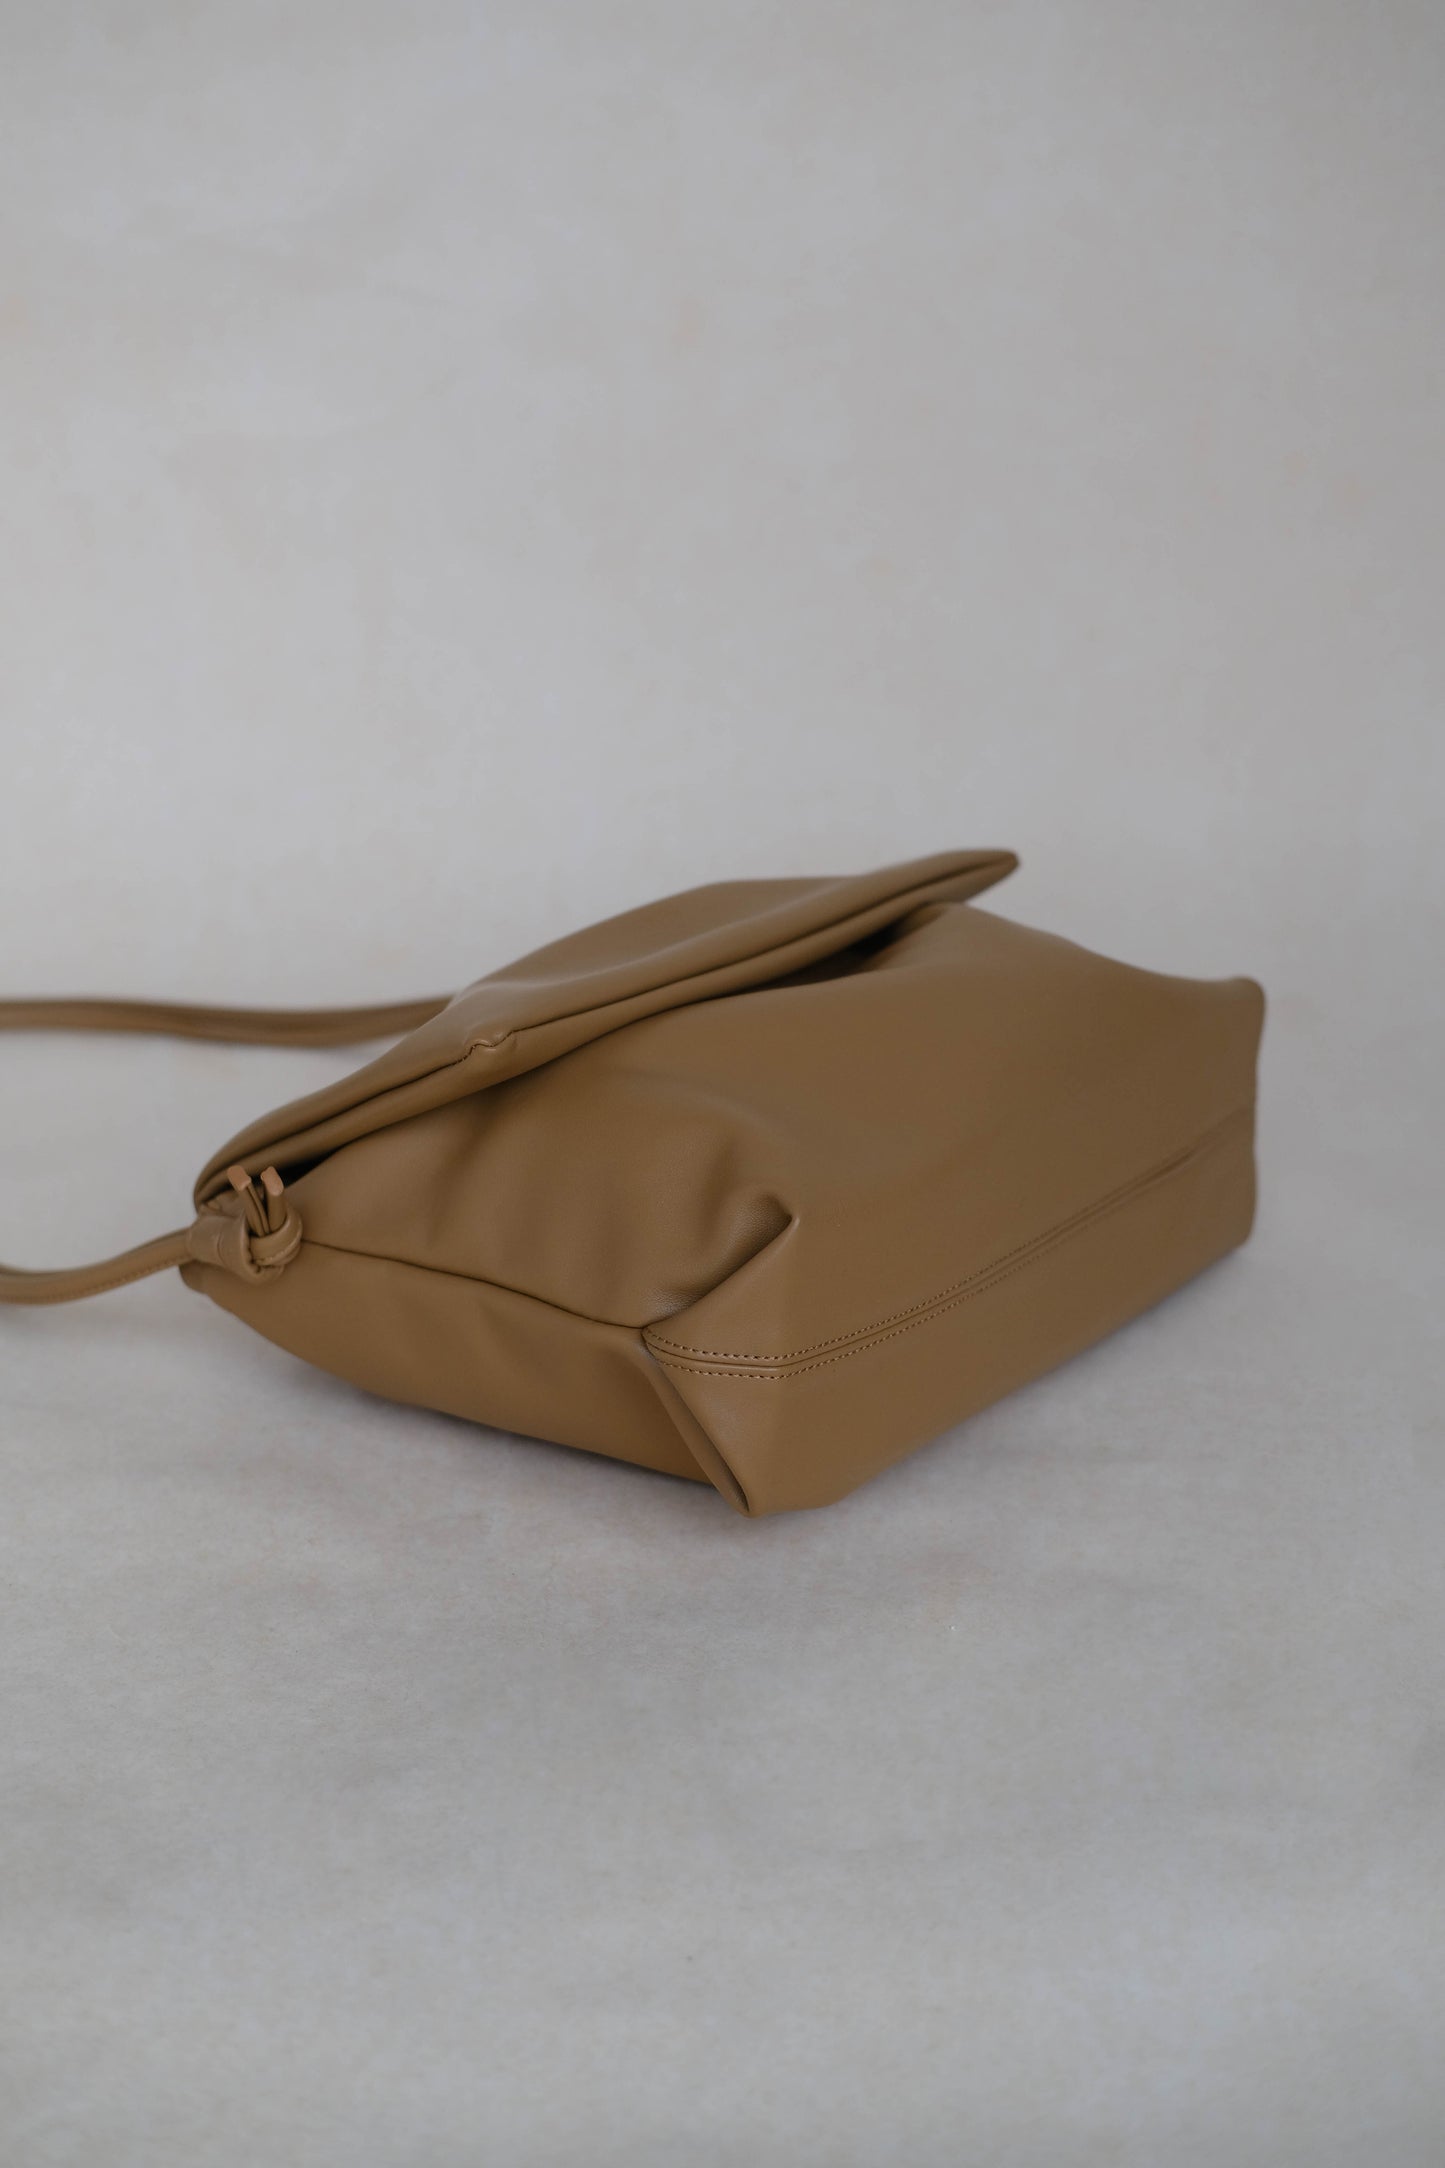 Drawstring pleated large capacity shoulder bag in brown color